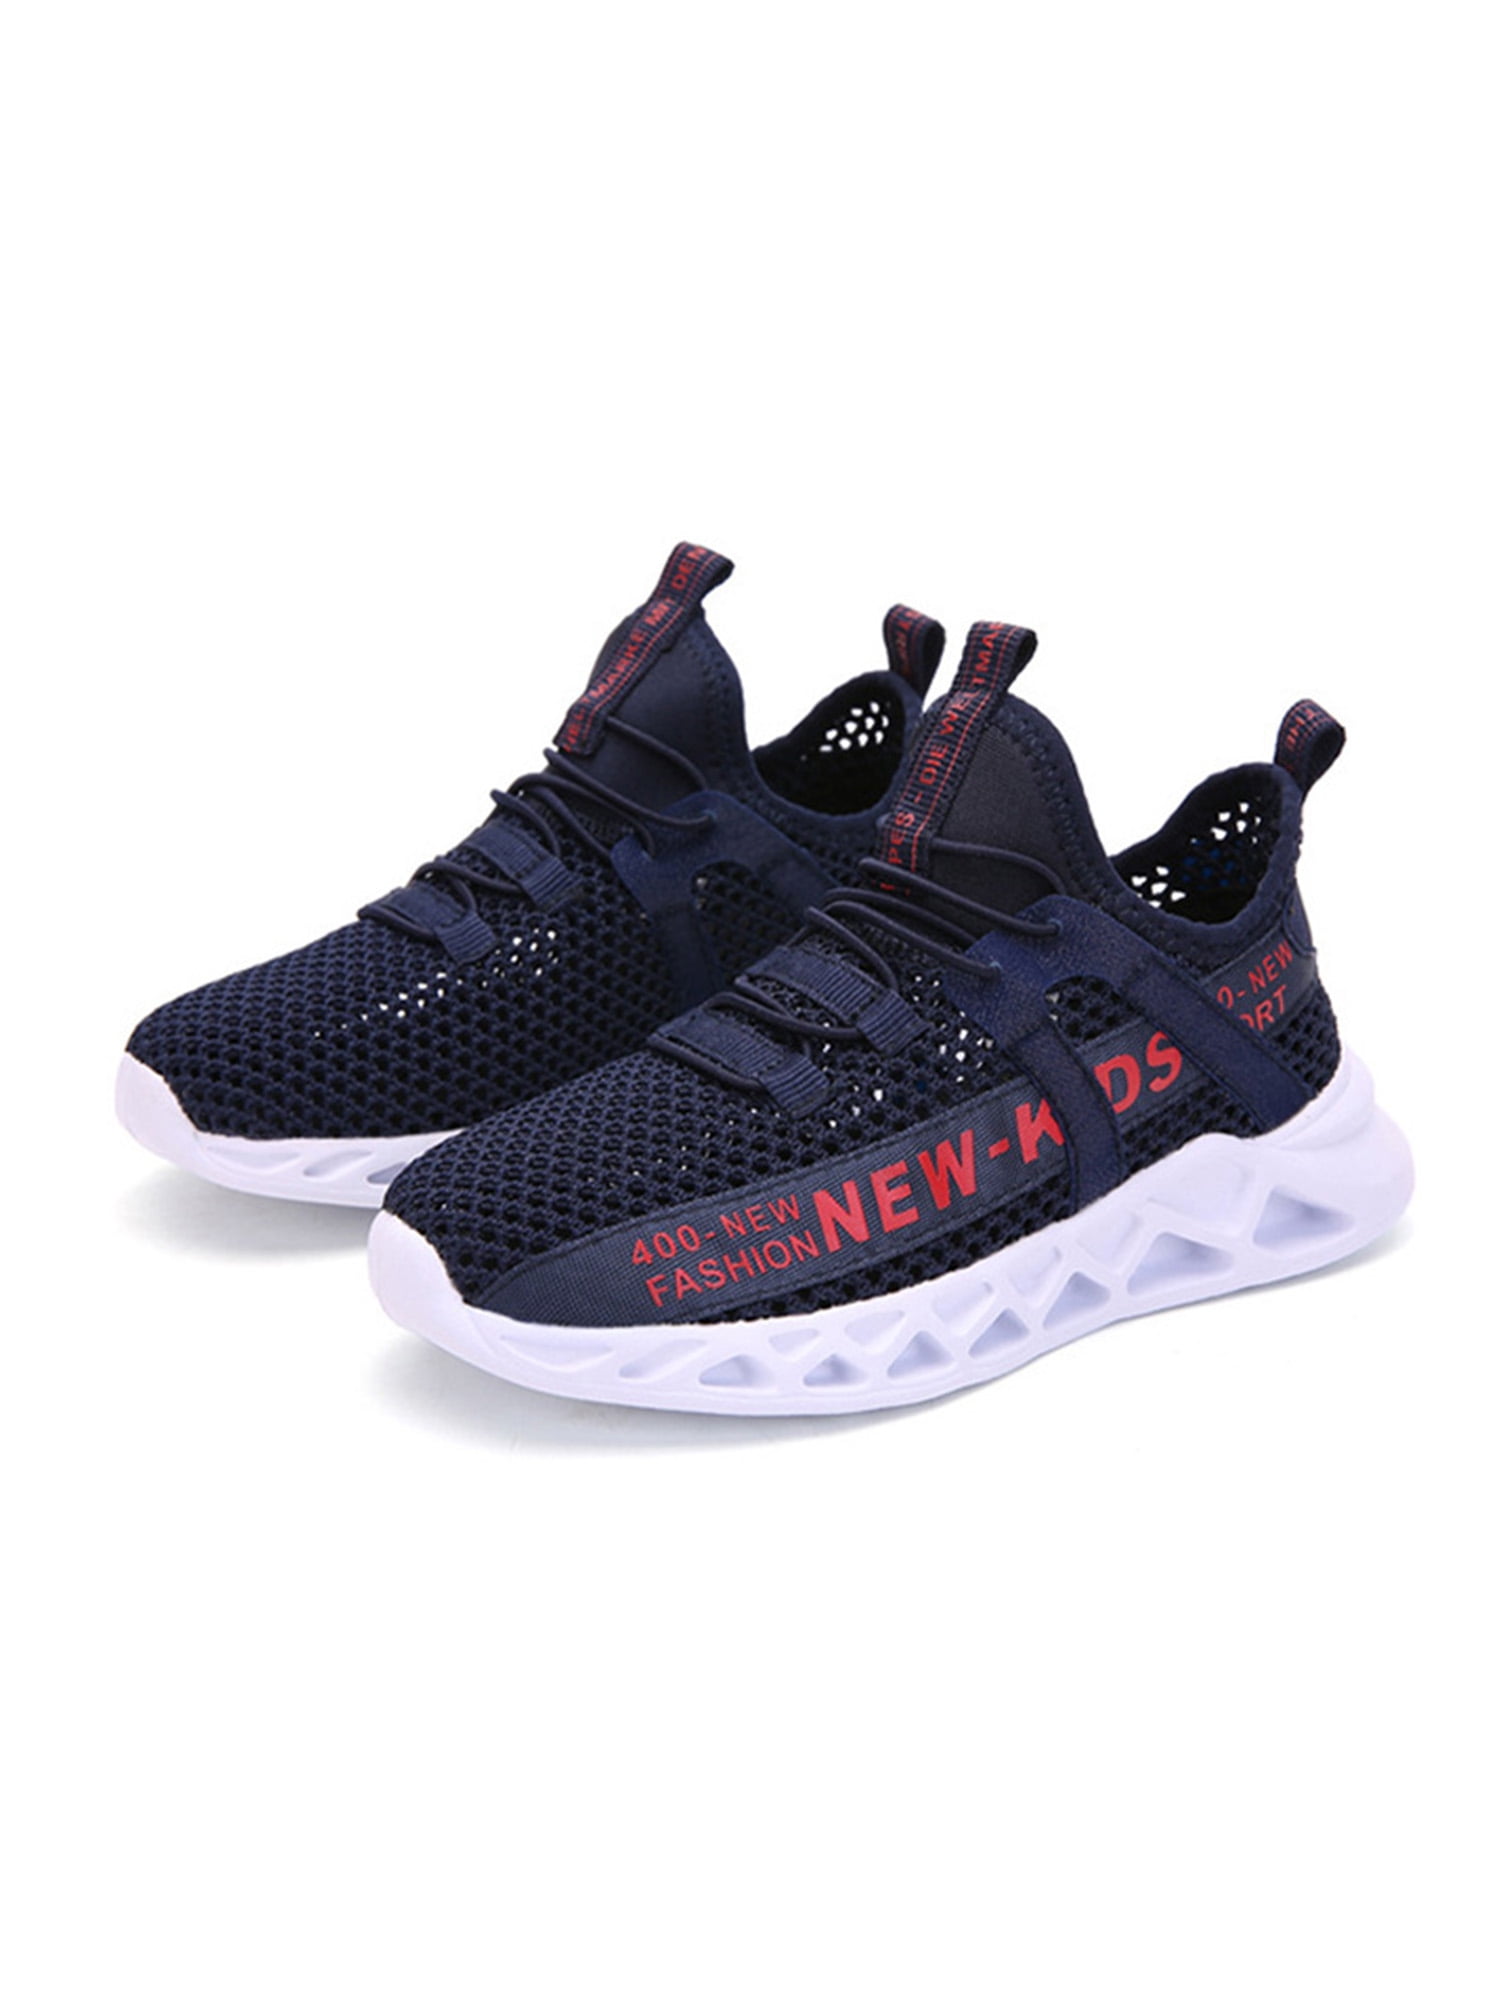 Spring Autumn Sports Shoes Children For Boys Girls Lace-up Anti-slip Sneakers DS 